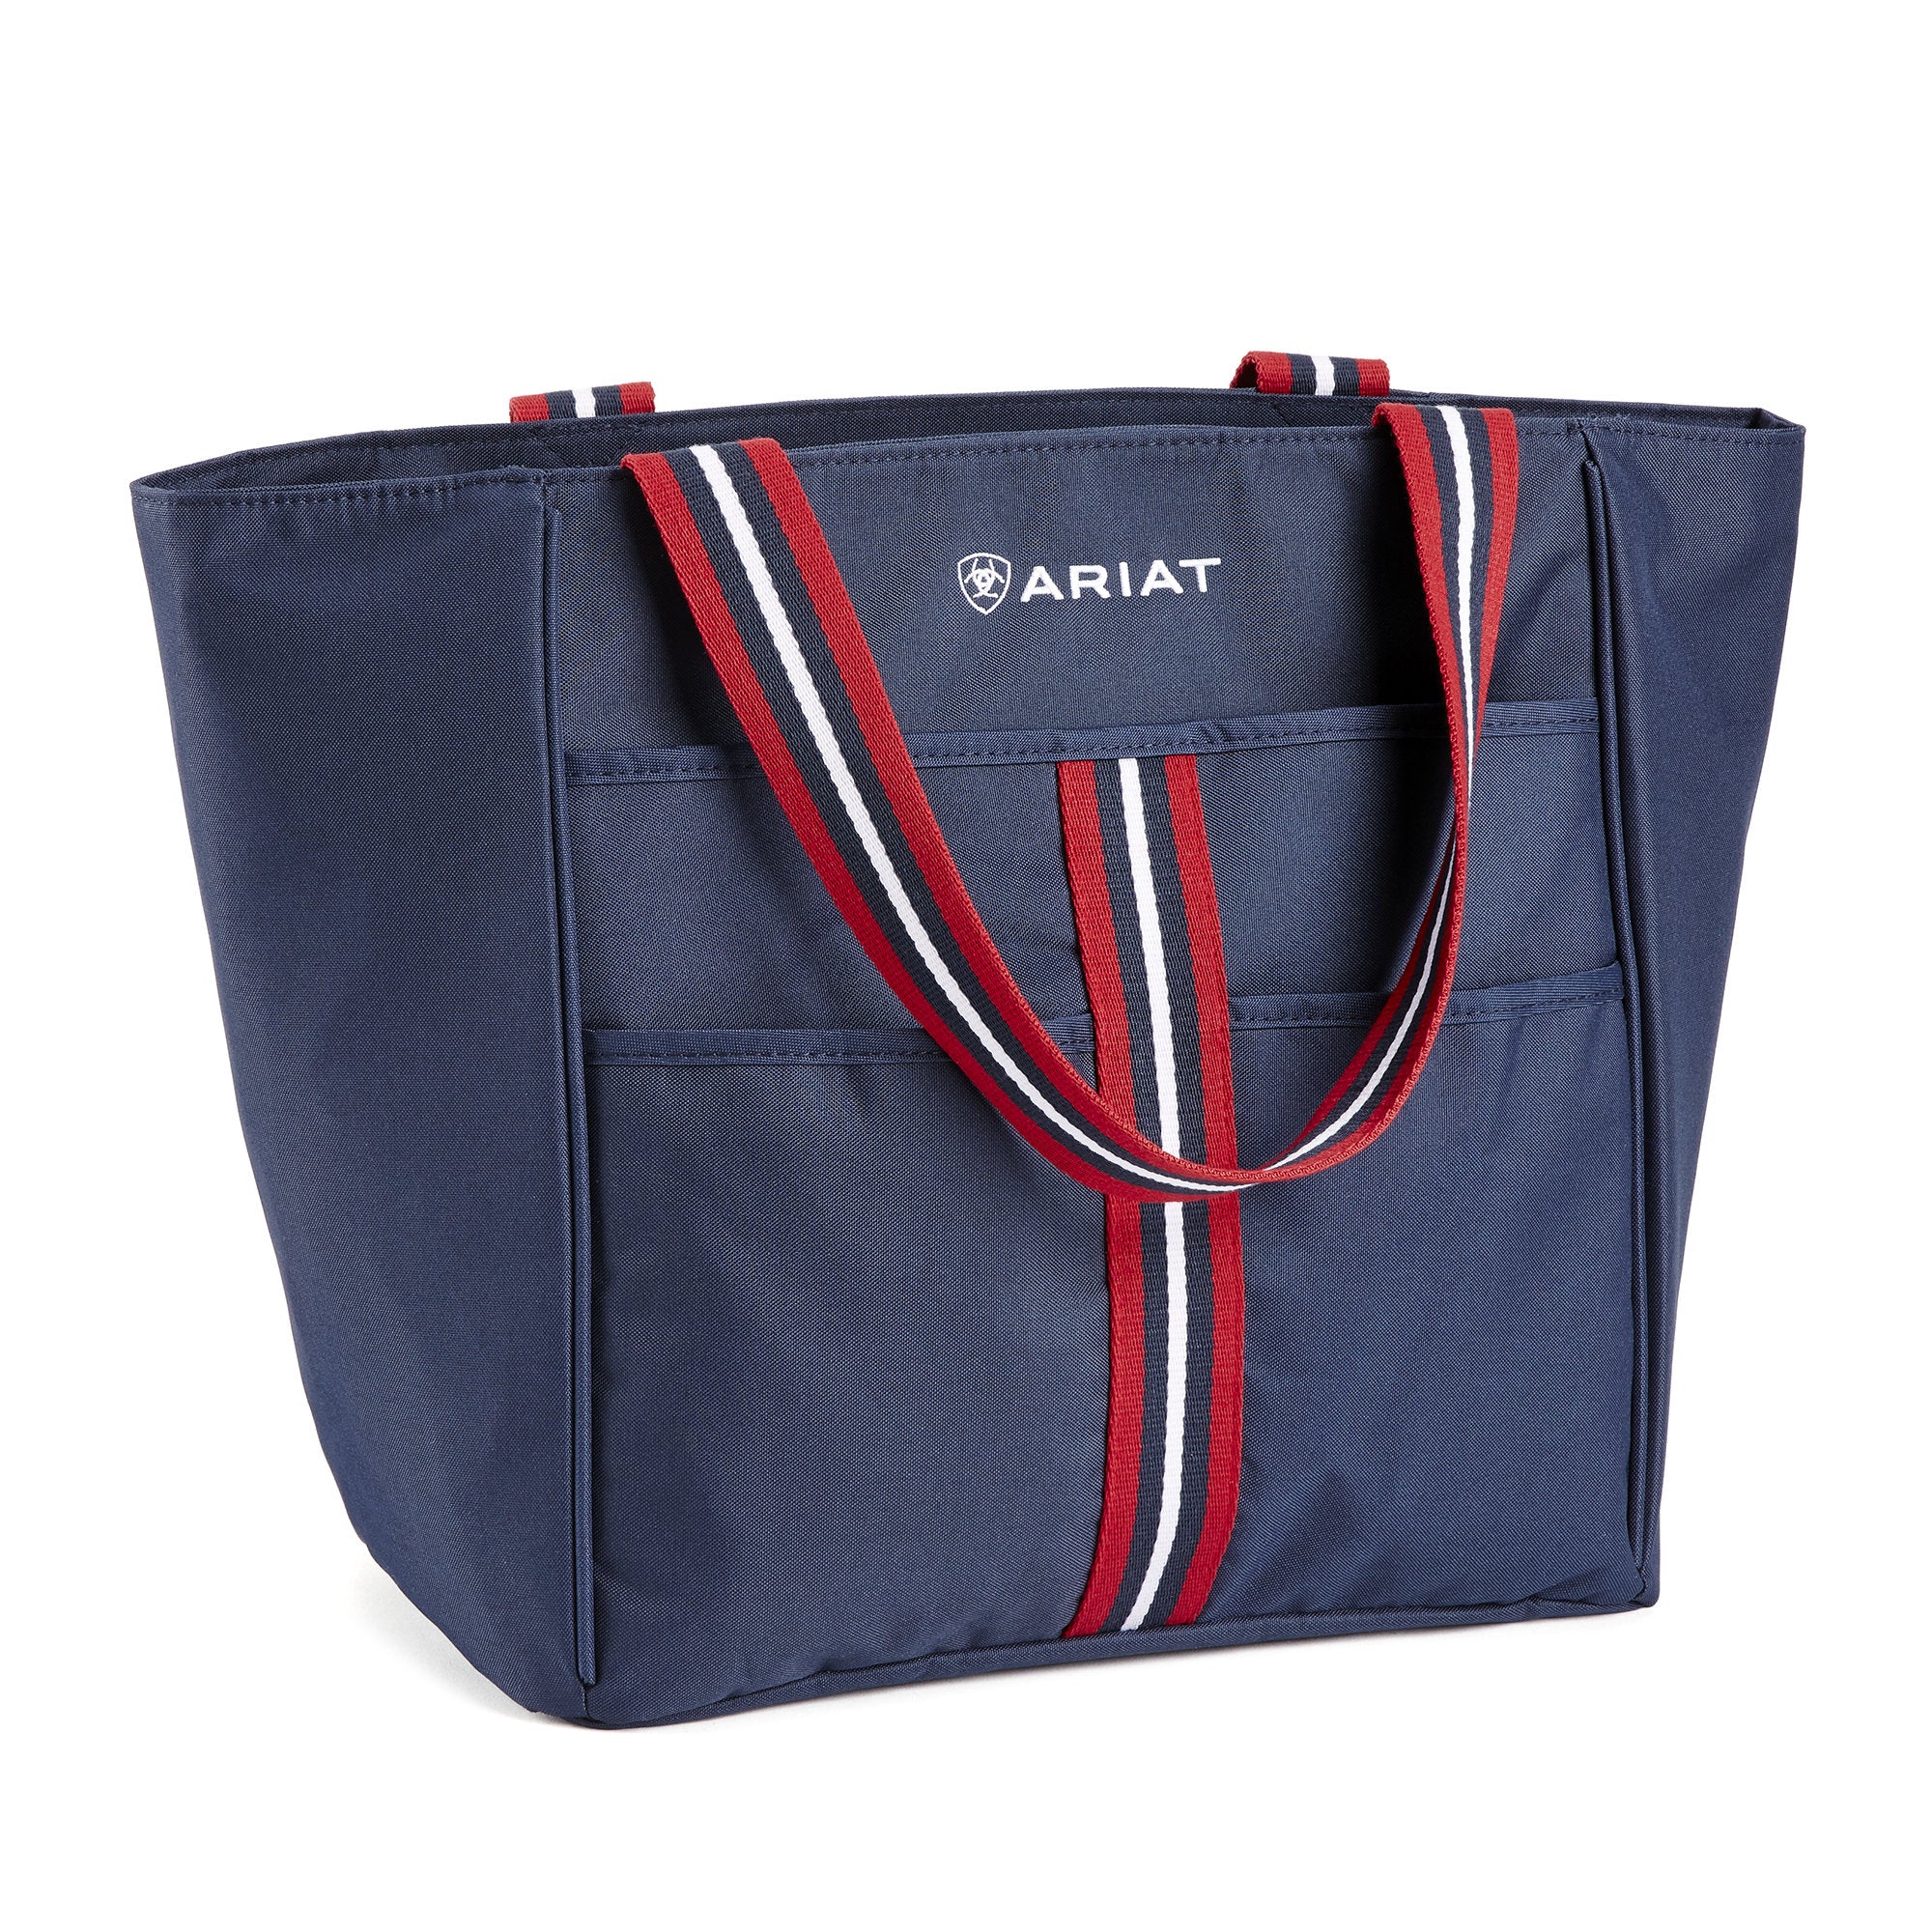 Ariat Carry All Tote Navy/Red